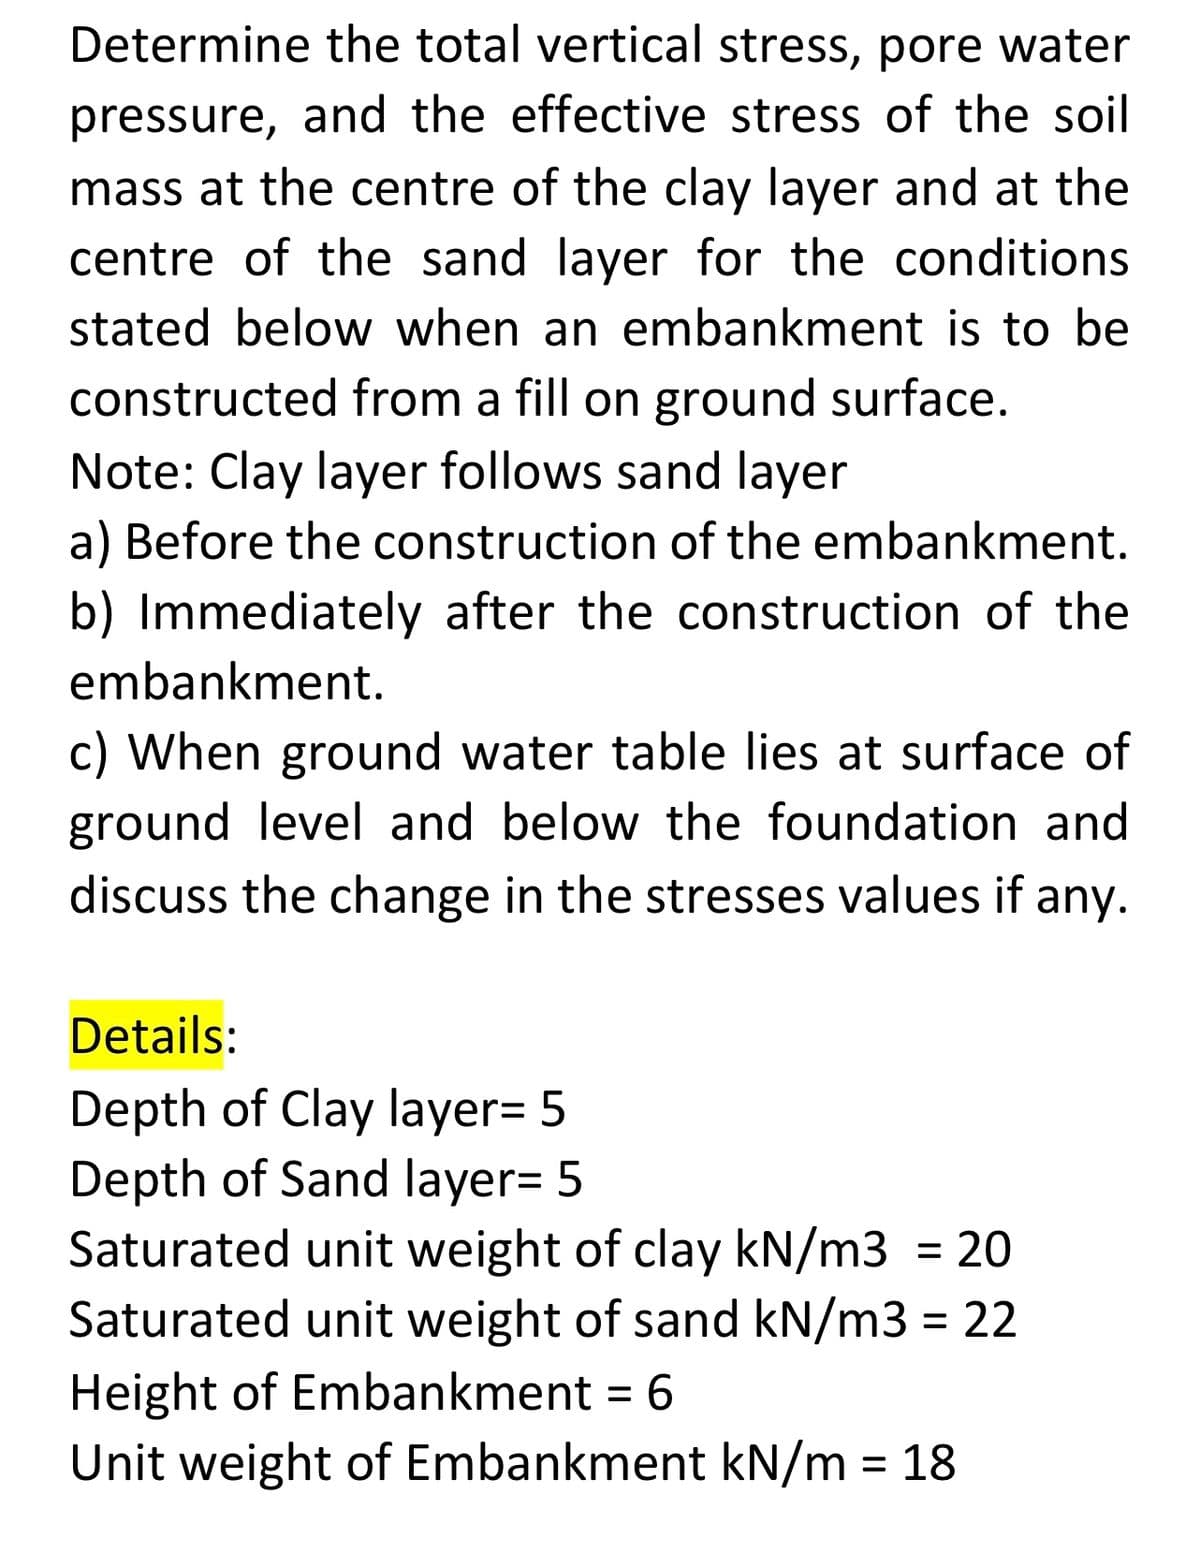 Determine the total vertical stress, pore water
pressure, and the effective stress of the soil
mass at the centre of the clay layer and at the
centre of the sand layer for the conditions
stated below when an embankment is to be
constructed from a fill on ground surface.
Note: Clay layer follows sand layer
a) Before the construction of the embankment.
b) Immediately after the construction of the
embankment.
c) When ground water table lies at surface of
ground level and below the foundation and
discuss the change in the stresses values if any.
Details:
Depth of Clay layer= 5
Depth of Sand layer= 5
Saturated unit weight of clay kN/m3 = 20
Saturated unit weight of sand kN/m3 = 22
%3D
Height of Embankment = 6
Unit weight of Embankment kN/m = 18
